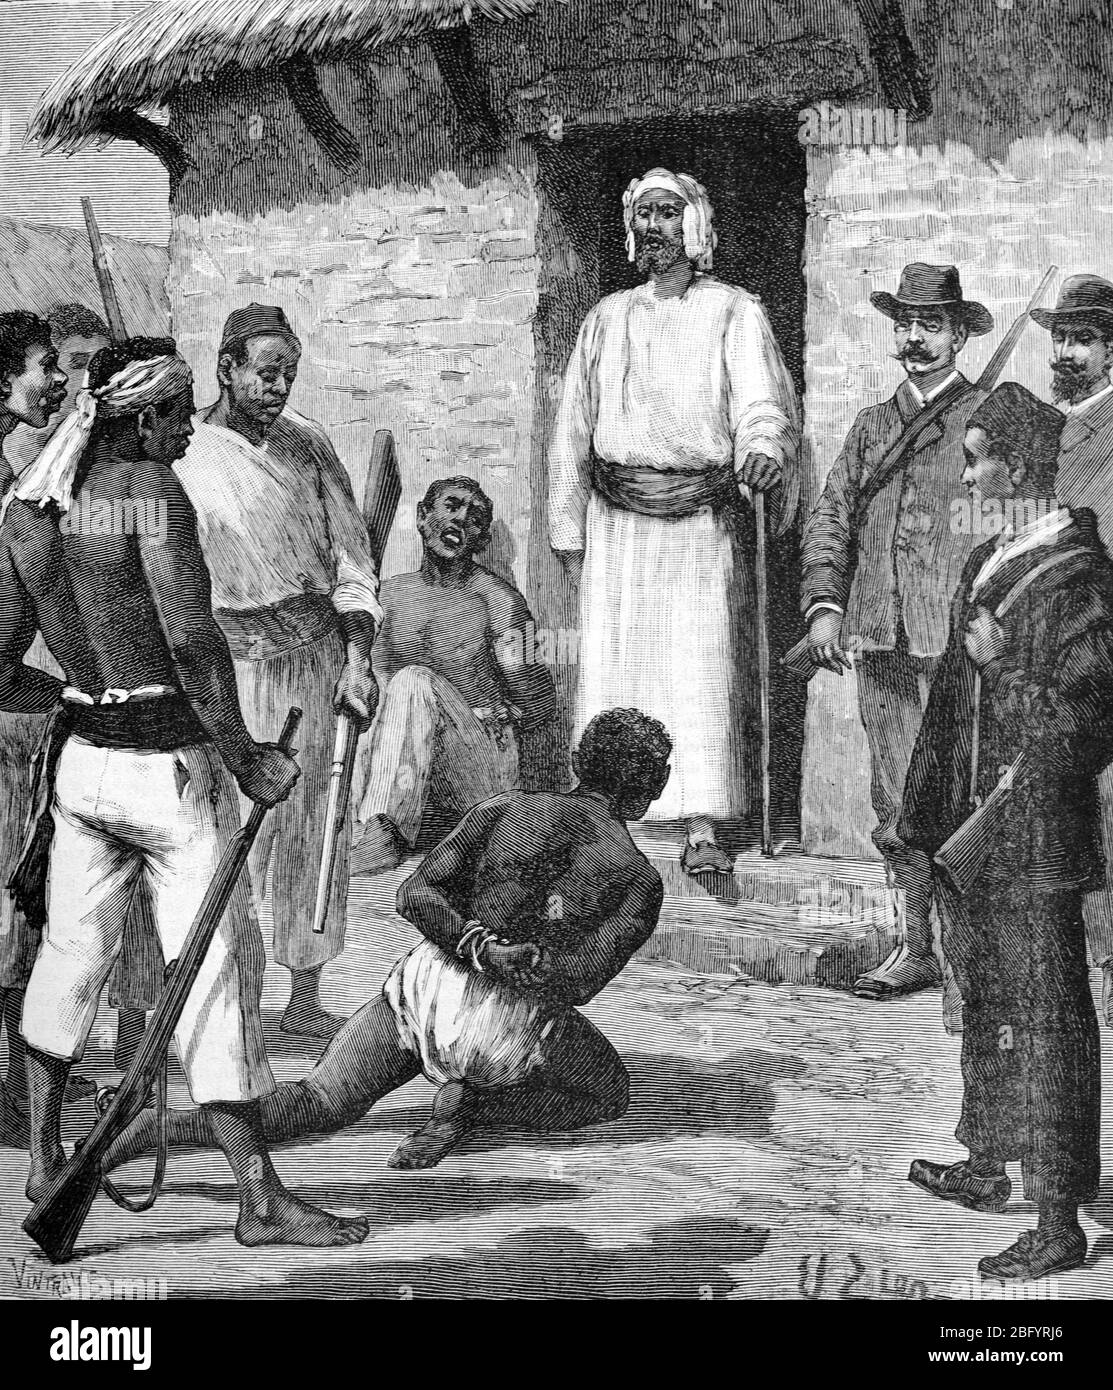 Elisee Trivier (1842-1912) French Explorer of Africa and the First to Cross Africa from the Atlantic to the Indian Ocean, Witnesses the Judgment of a Criminal by a Tribal Chief or Sultan in the African Great Lakes region of Central Africa. The defendant was shot for murder. Vintage or Old Illustration or Engraving 1890 Stock Photo